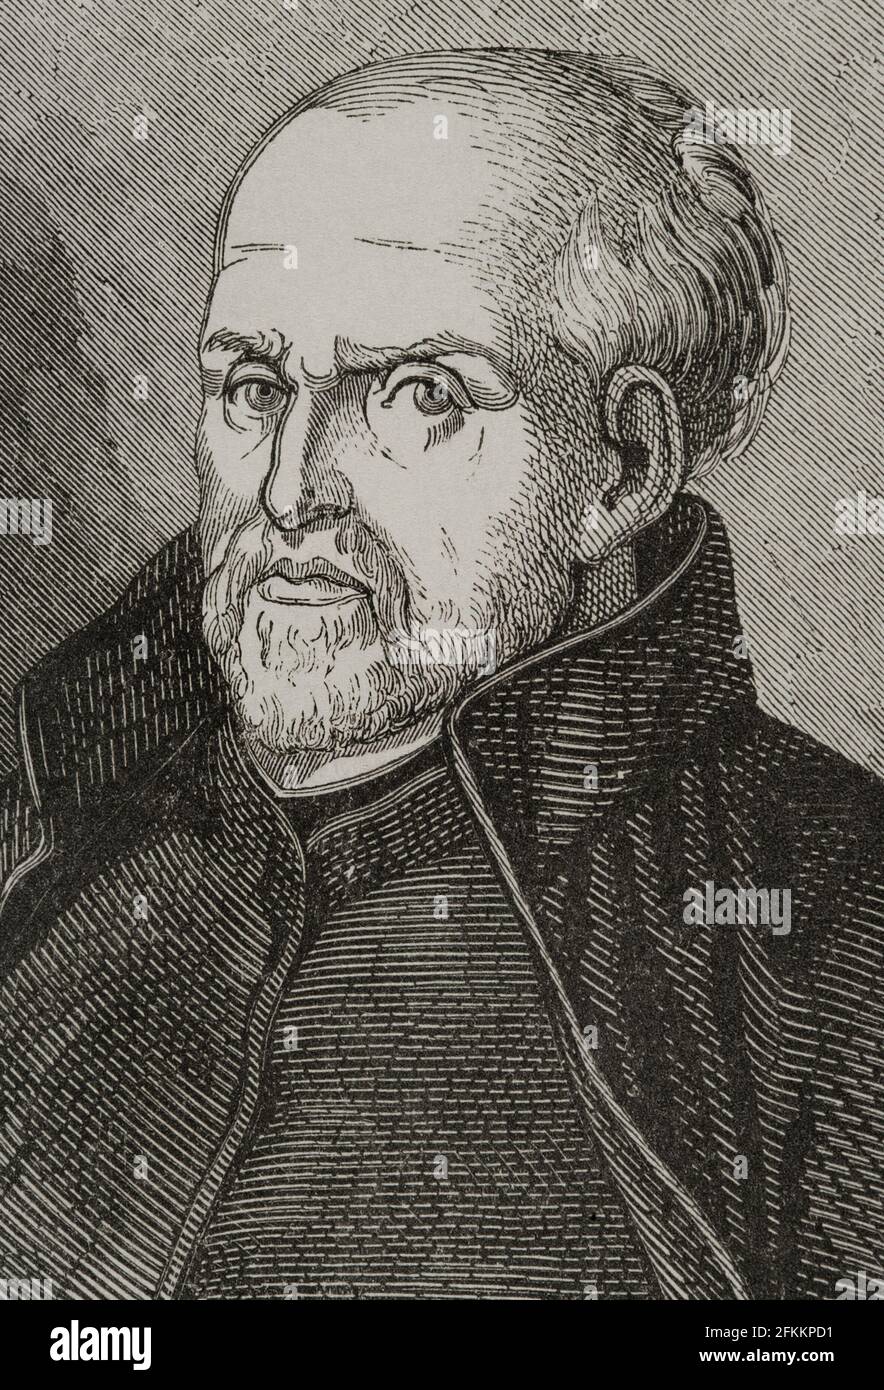 Juan de Mariana, also known as Father Mariana (1536-1624). Spanish Jesuit theologian and historian. Portrait. Engraving. Historia General de España by Father Mariana. Madrid, 1852. Stock Photo